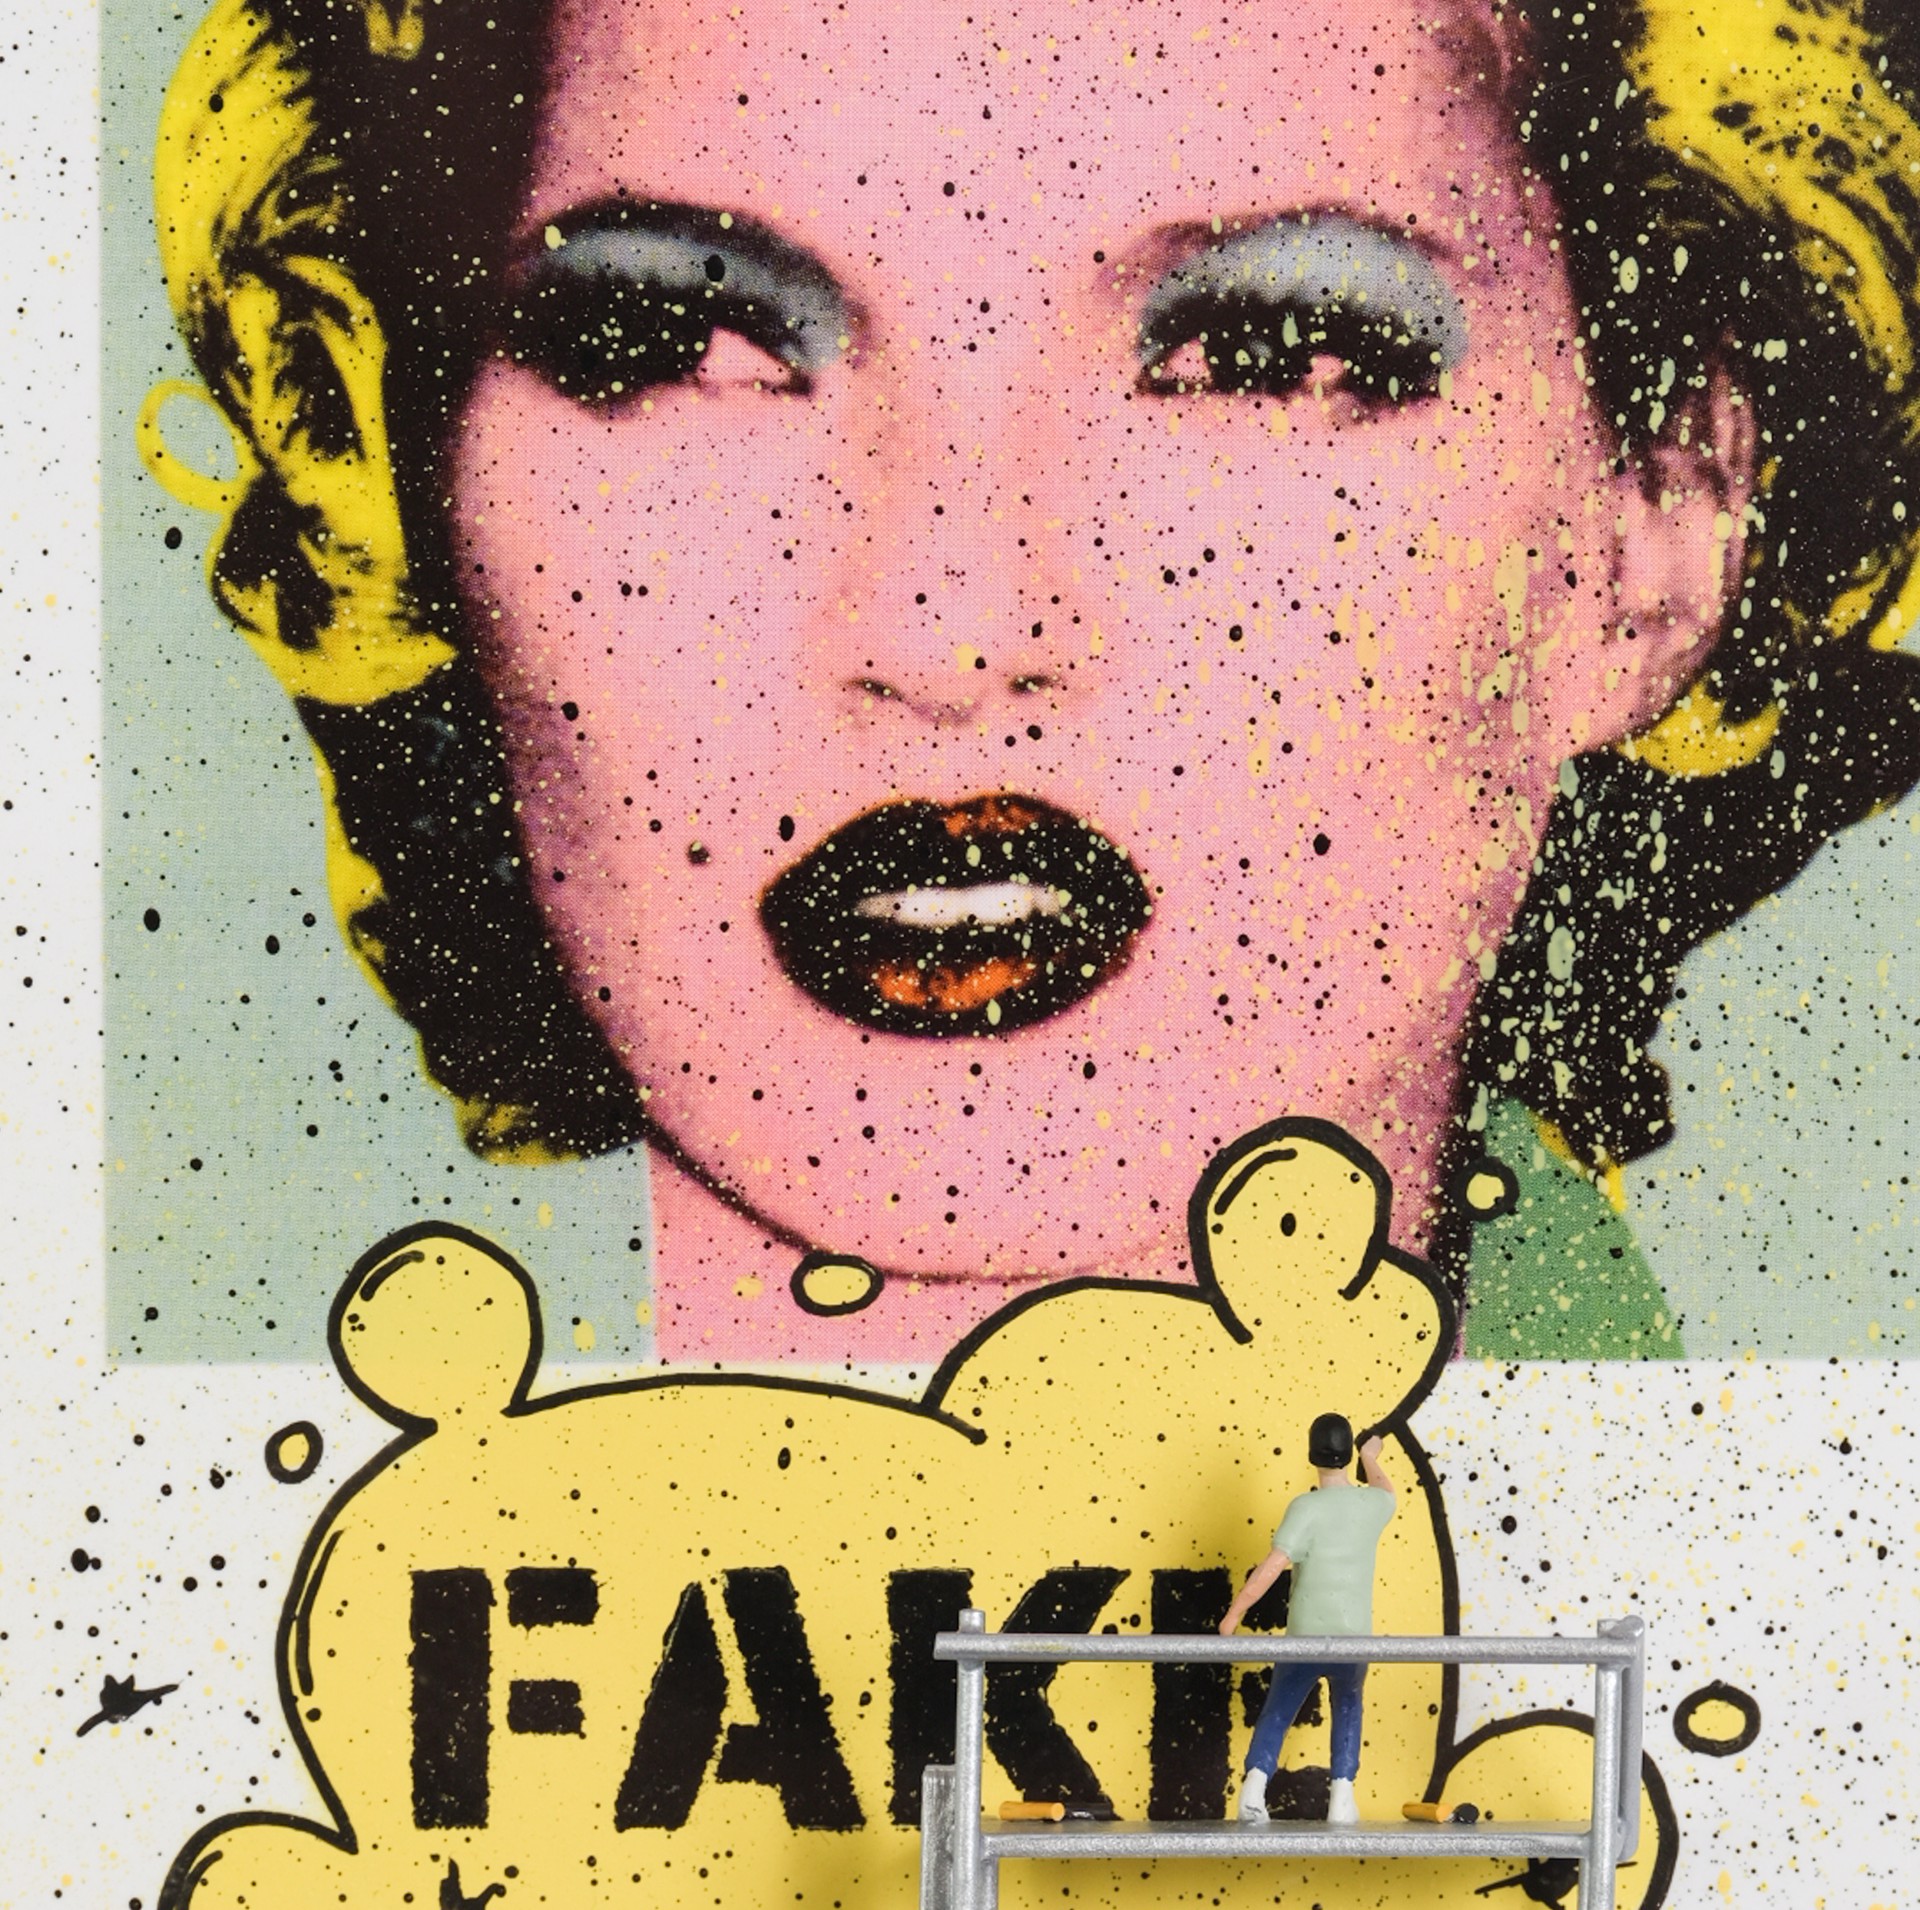 Fake - Kate Moss by Roy's People